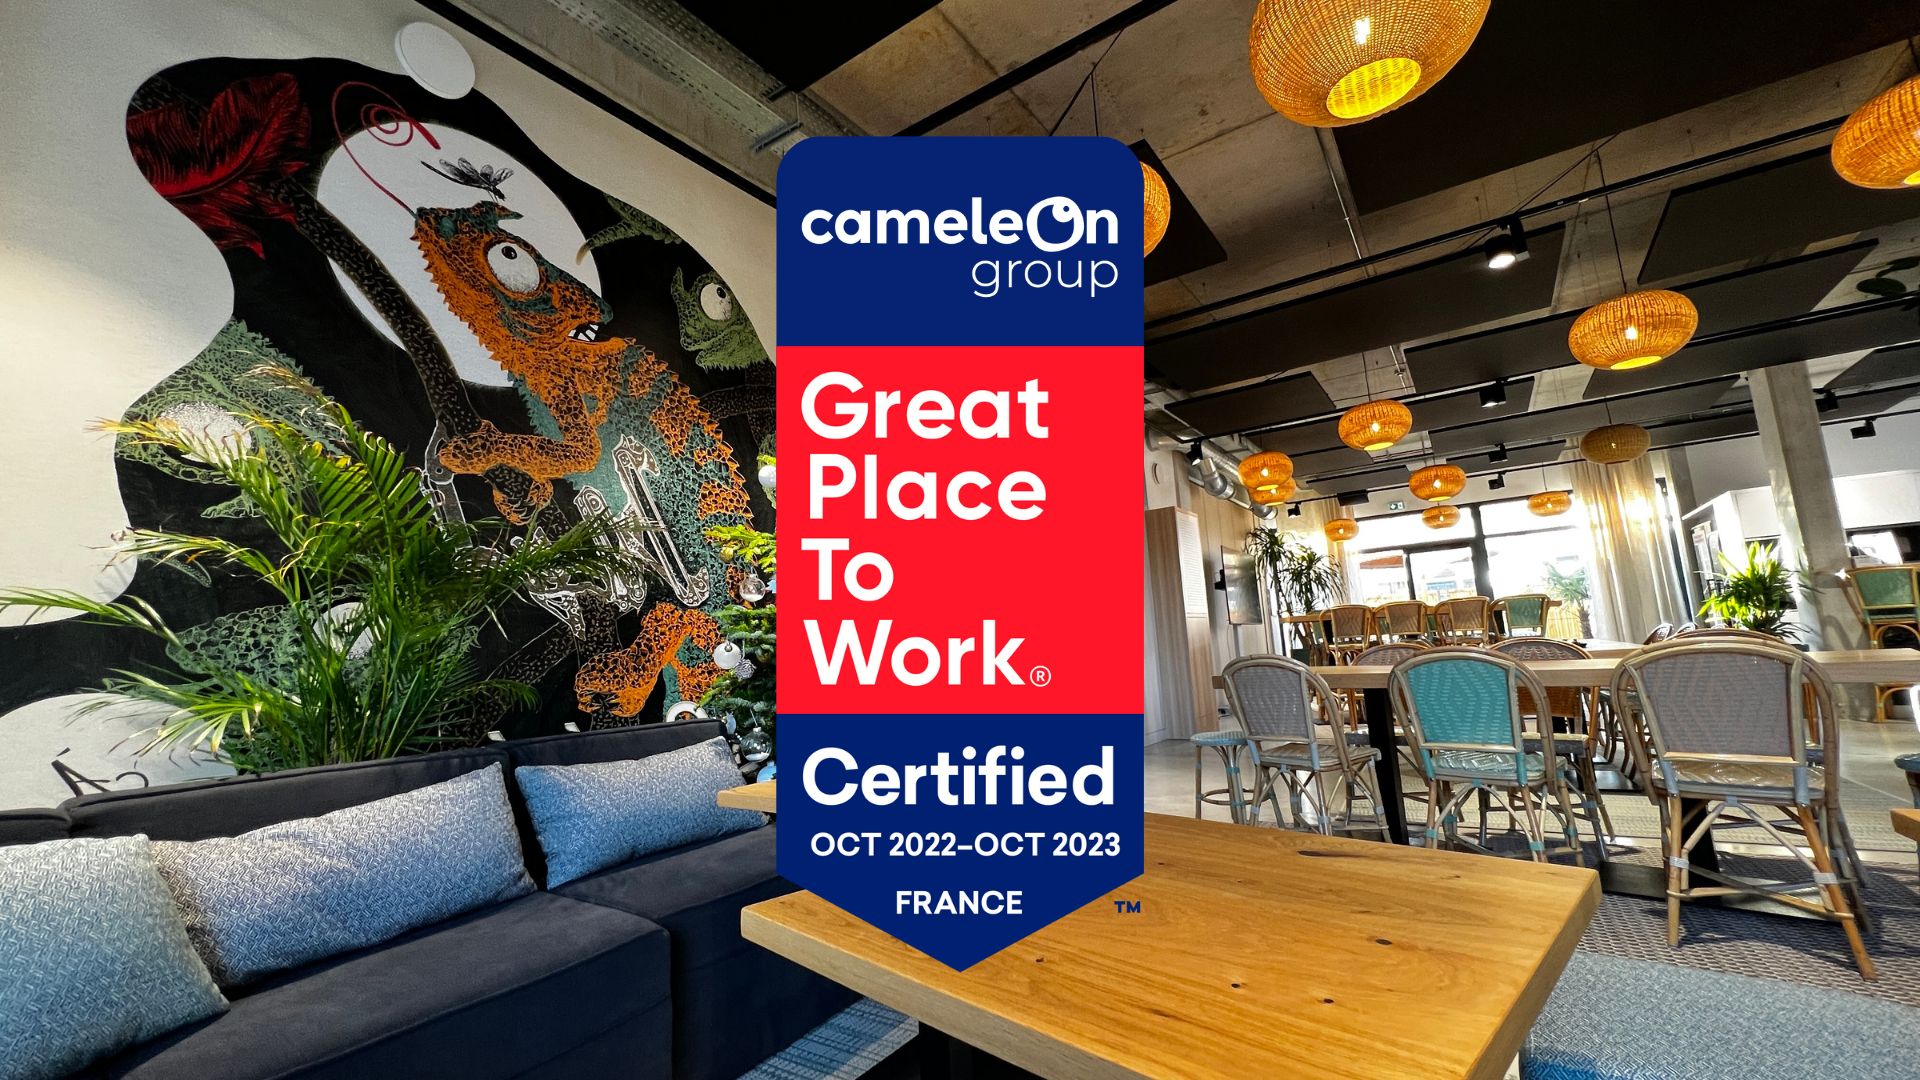 great place to work cameleon group certification